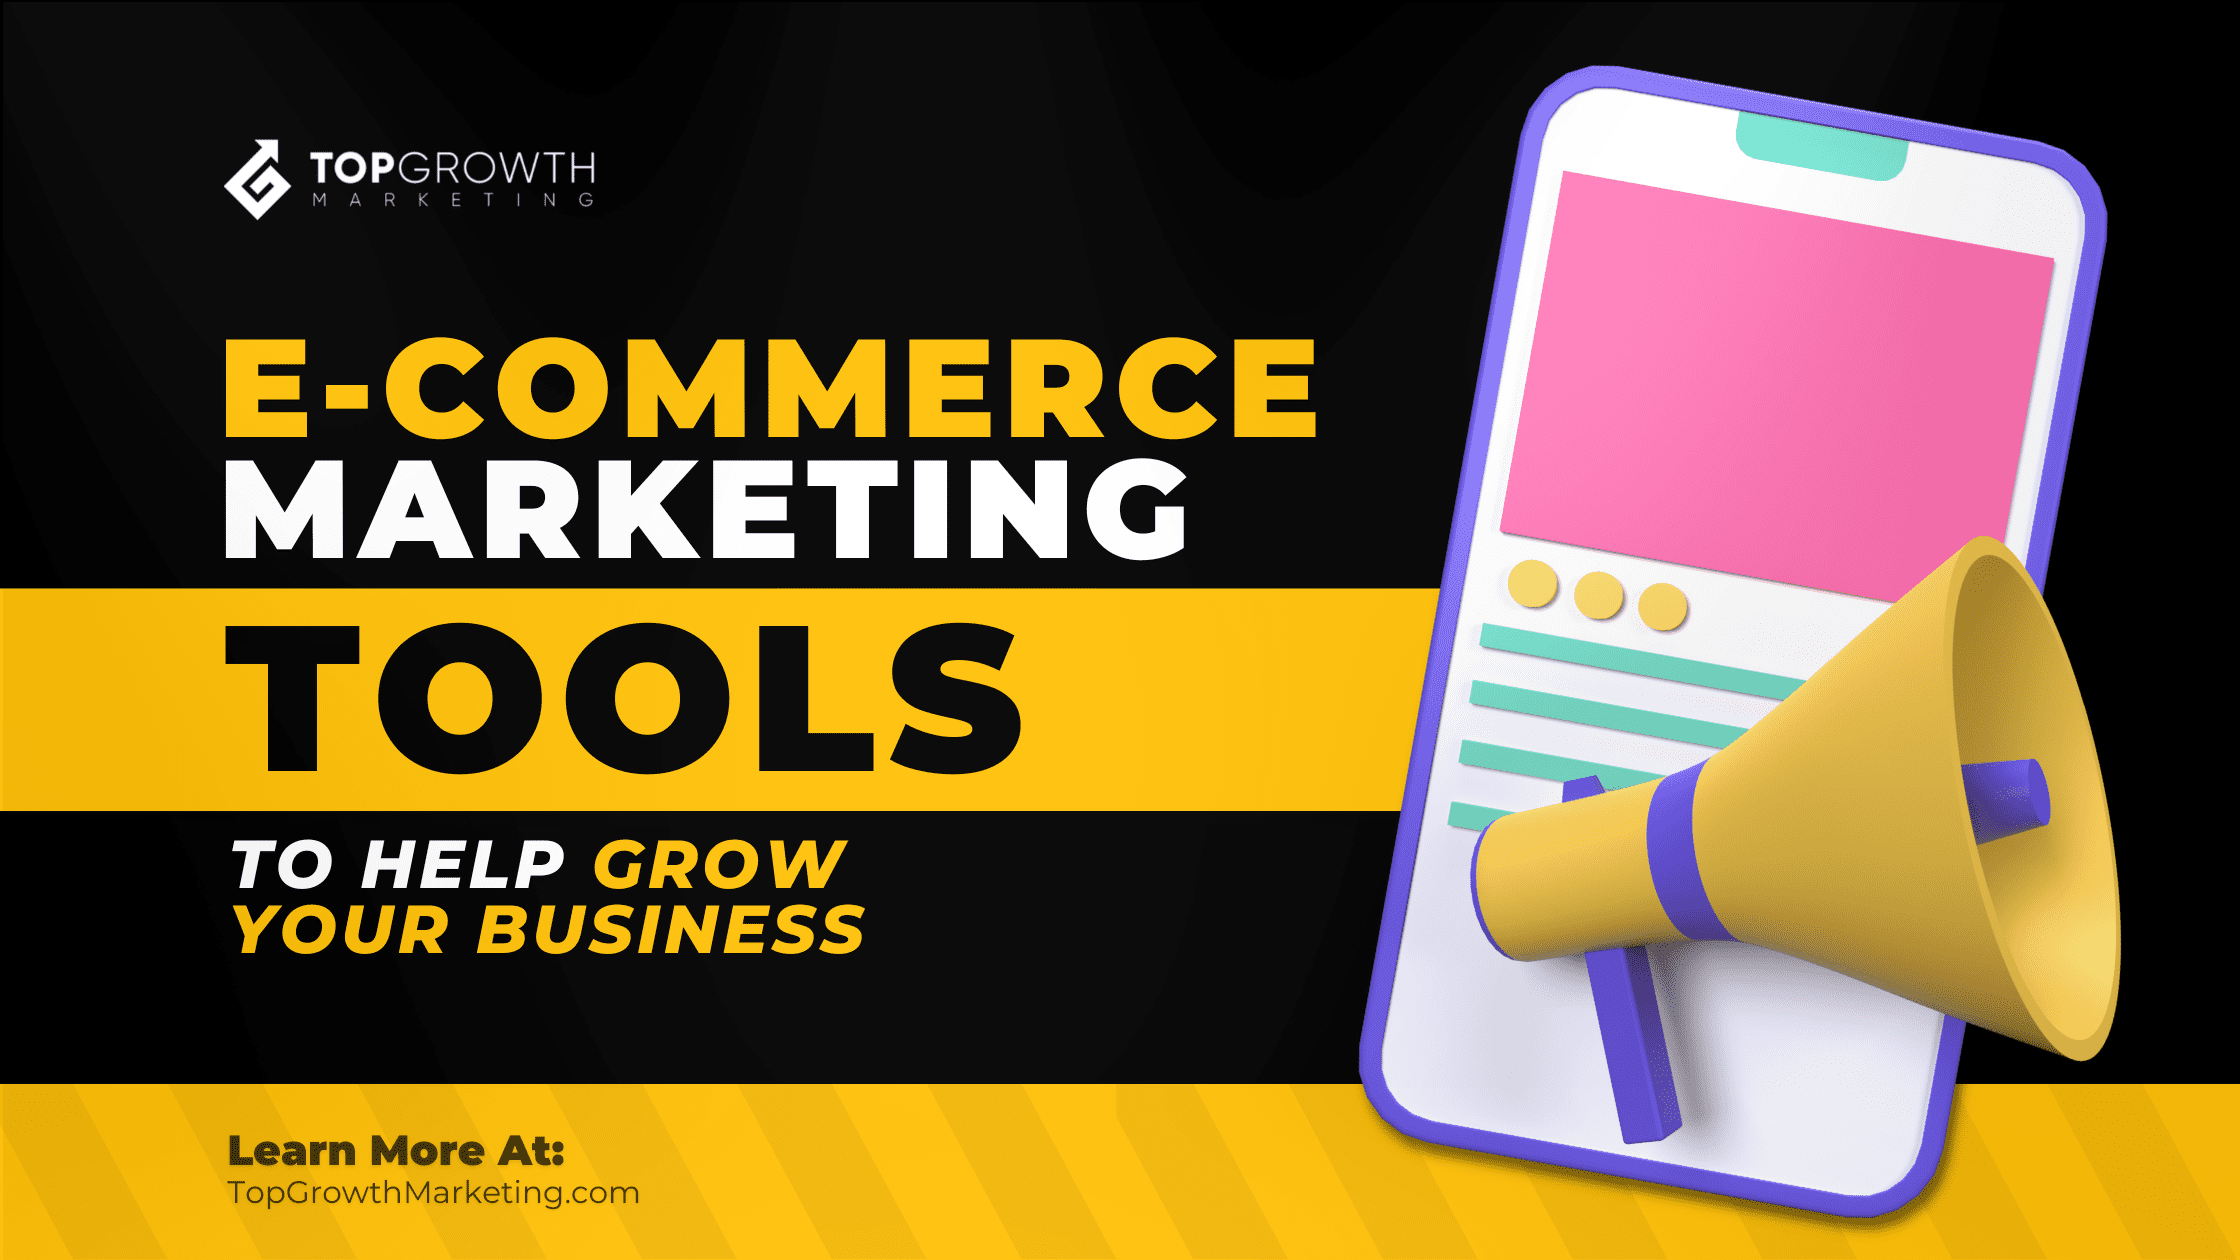 e-commerce marketing tools for growth